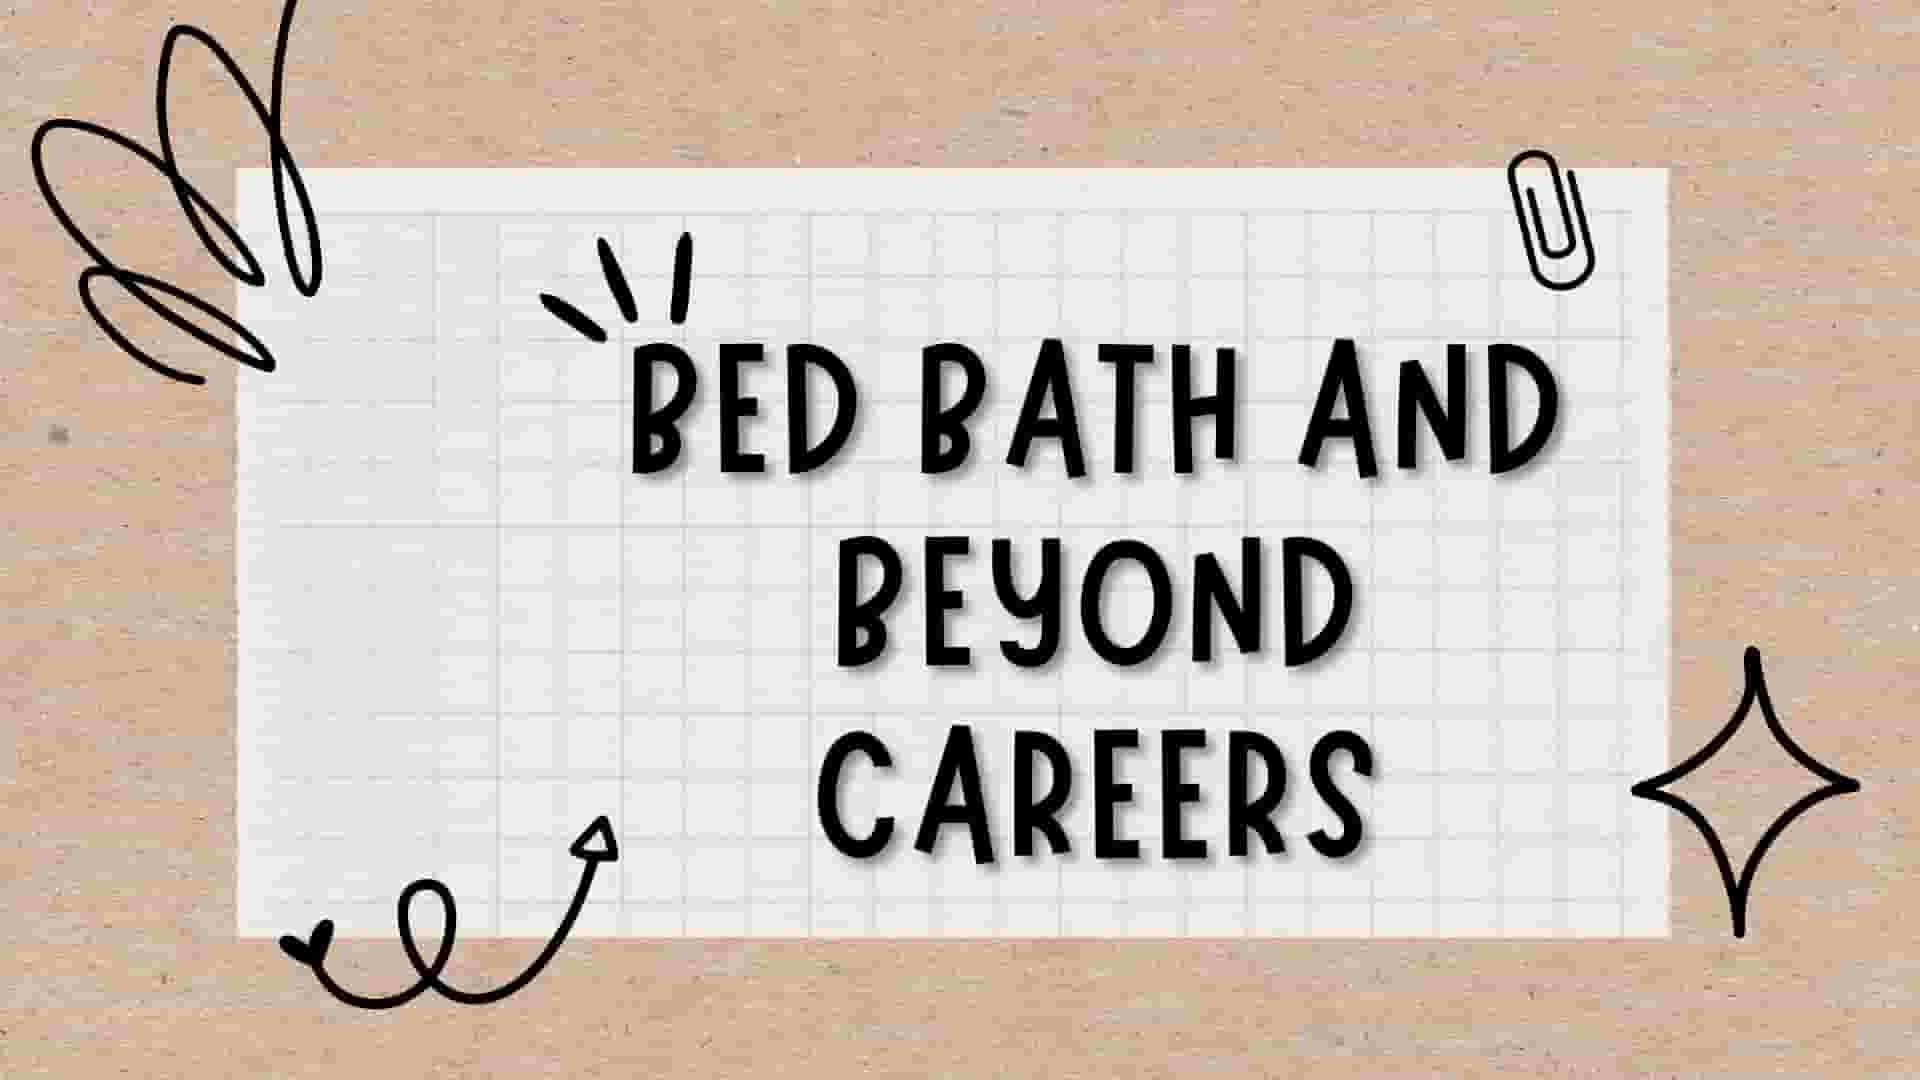 Bed Bath And Beyond Careers jobs